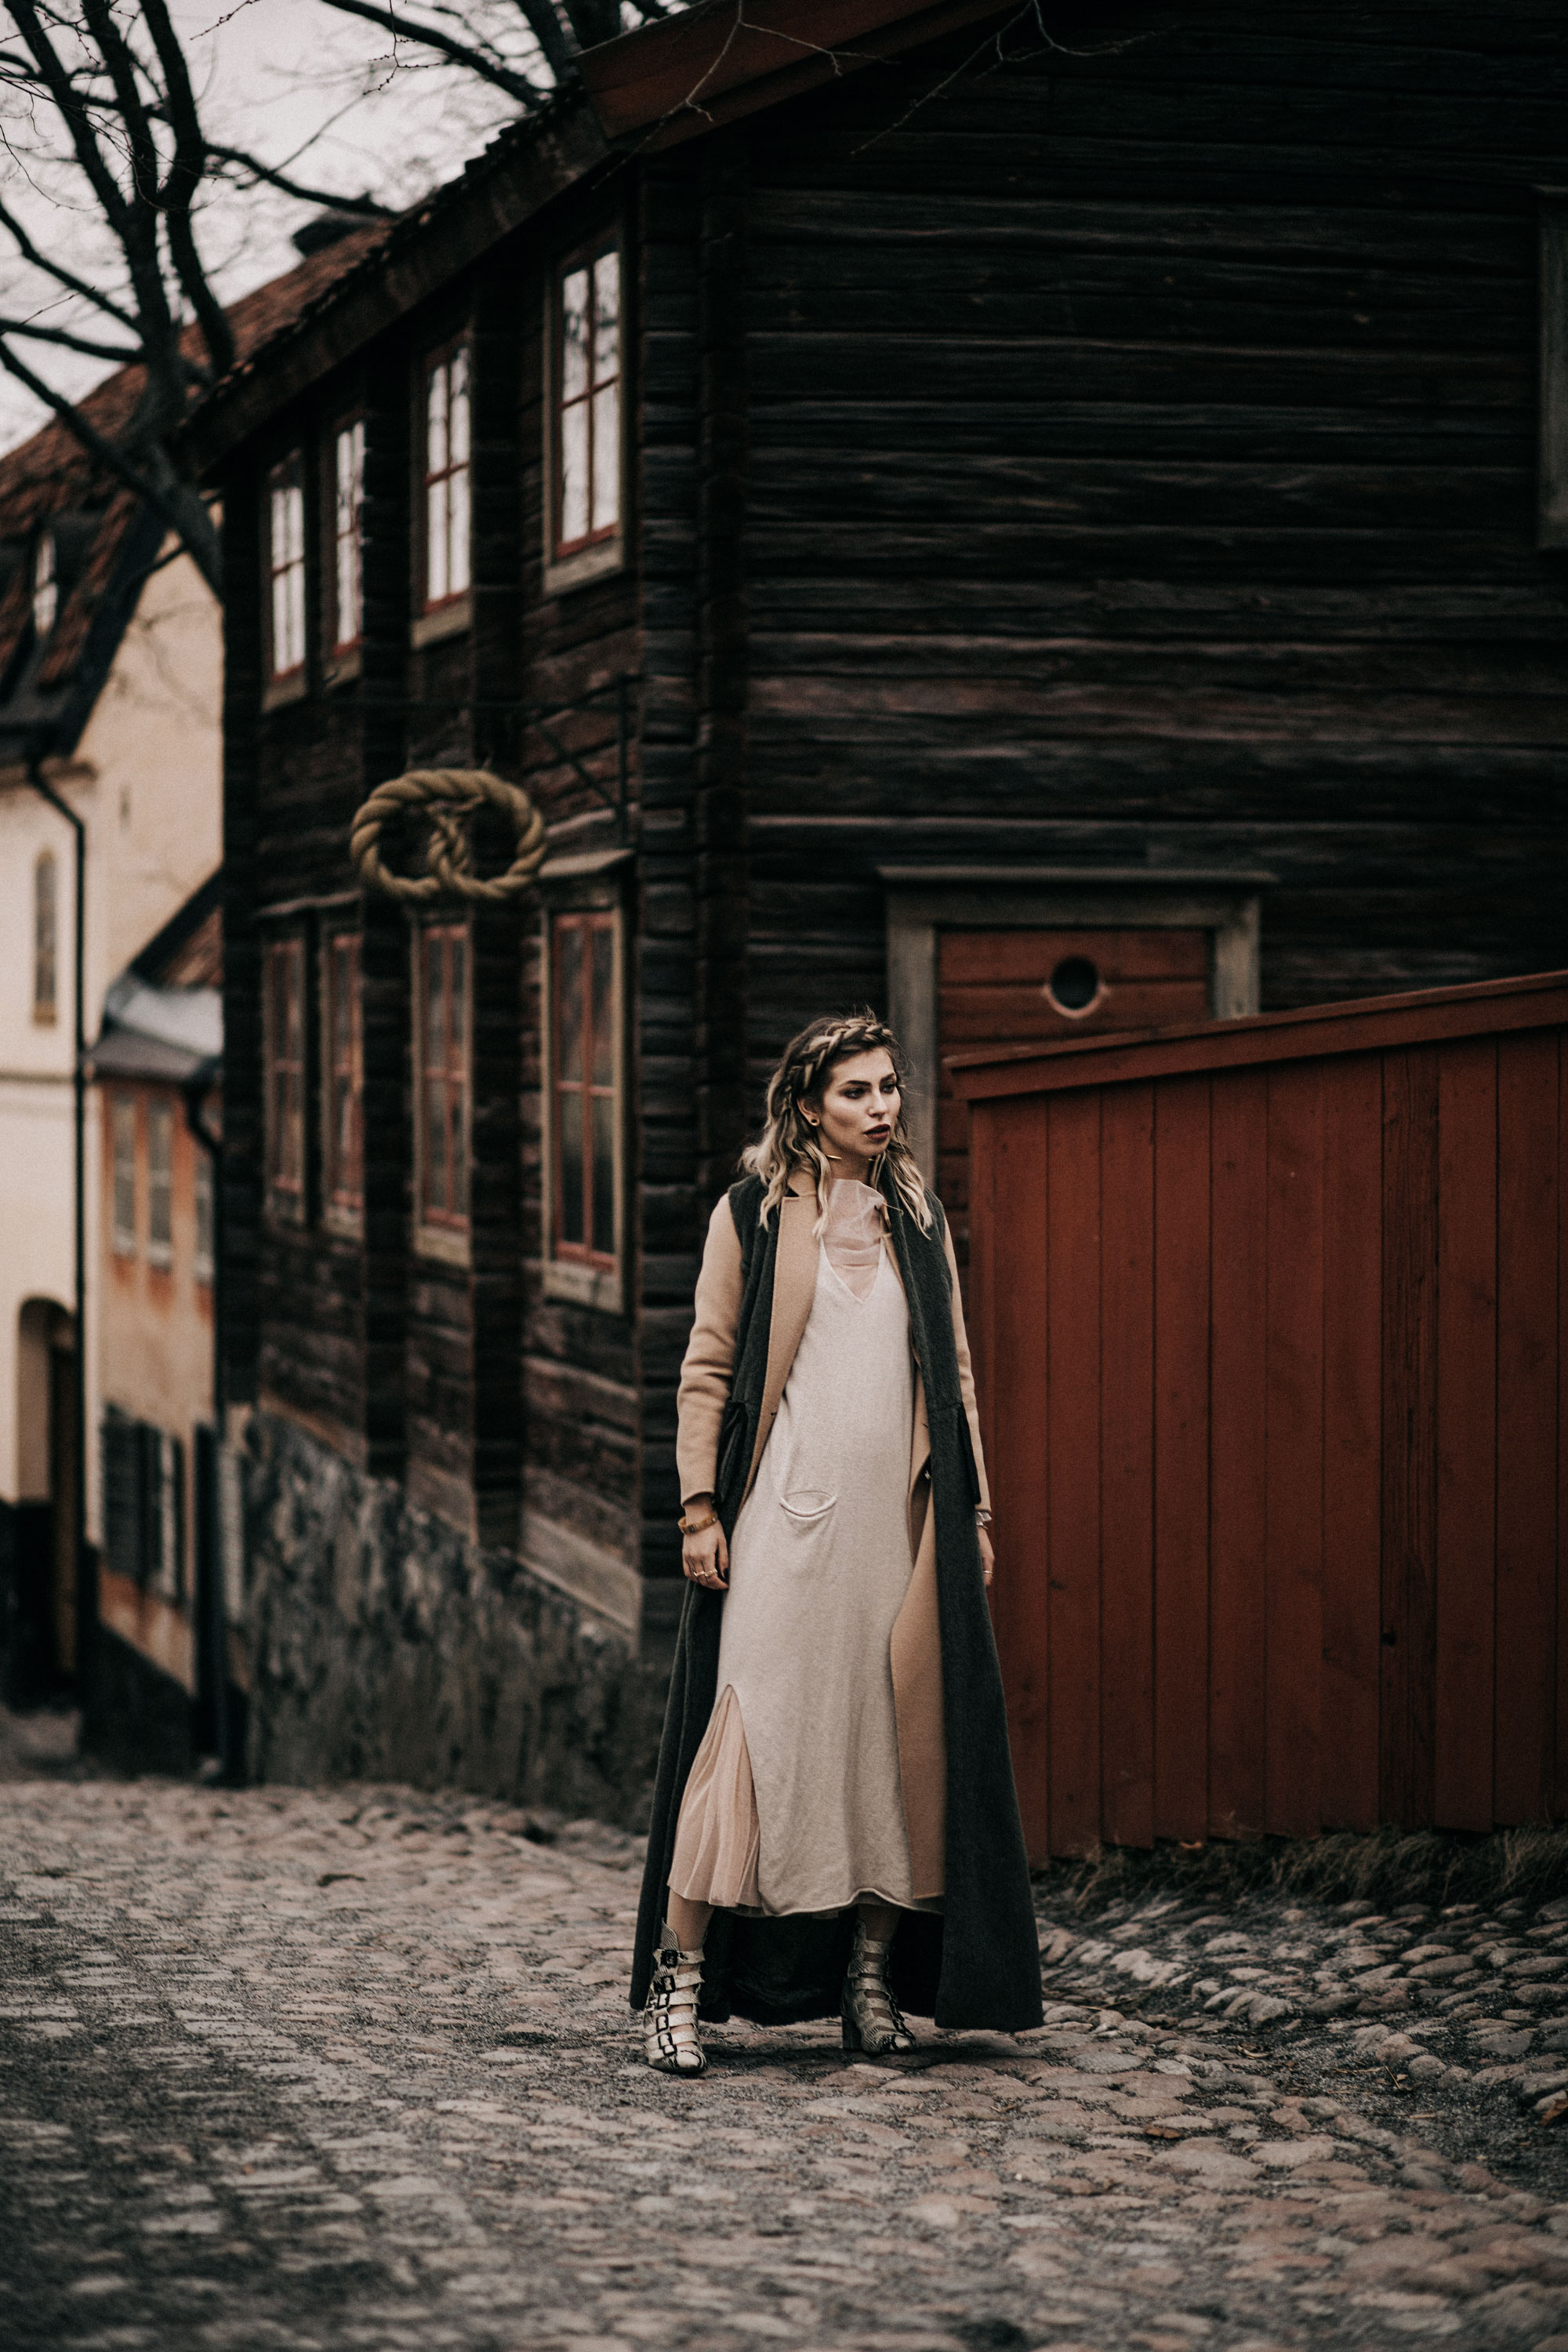 Fashion Editorial: Traditional Sweden | style: folklore, winter, moody, edgy, natural + 5 tips for a more hygge life | location: Skansen, Stockholm